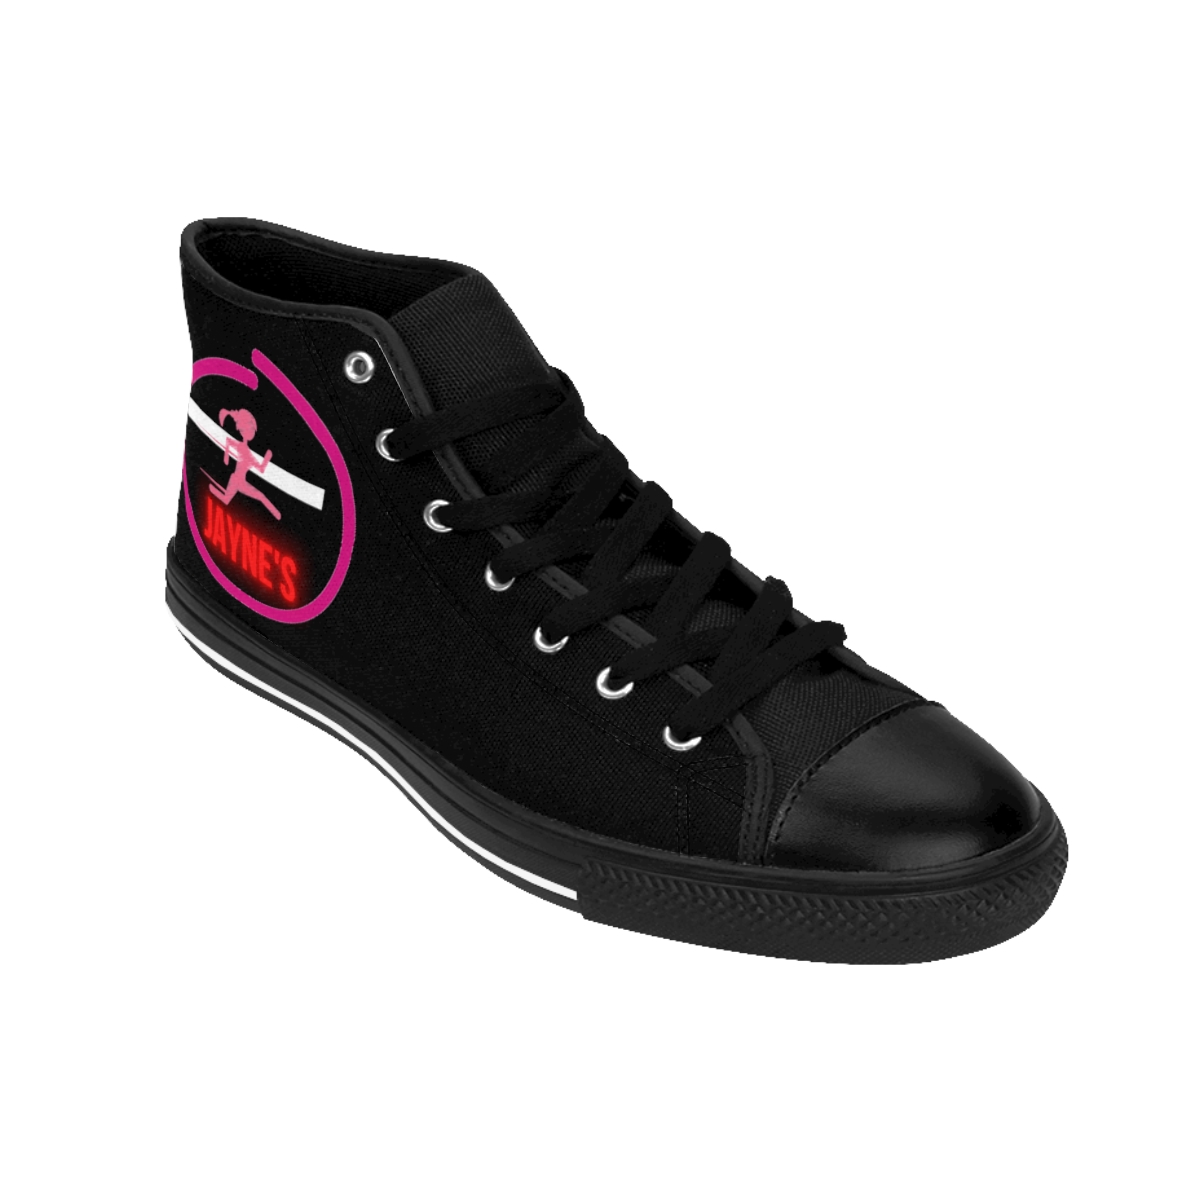 Jayne's Brand - Women's High-top Sneakers (Limited Edition) product thumbnail image